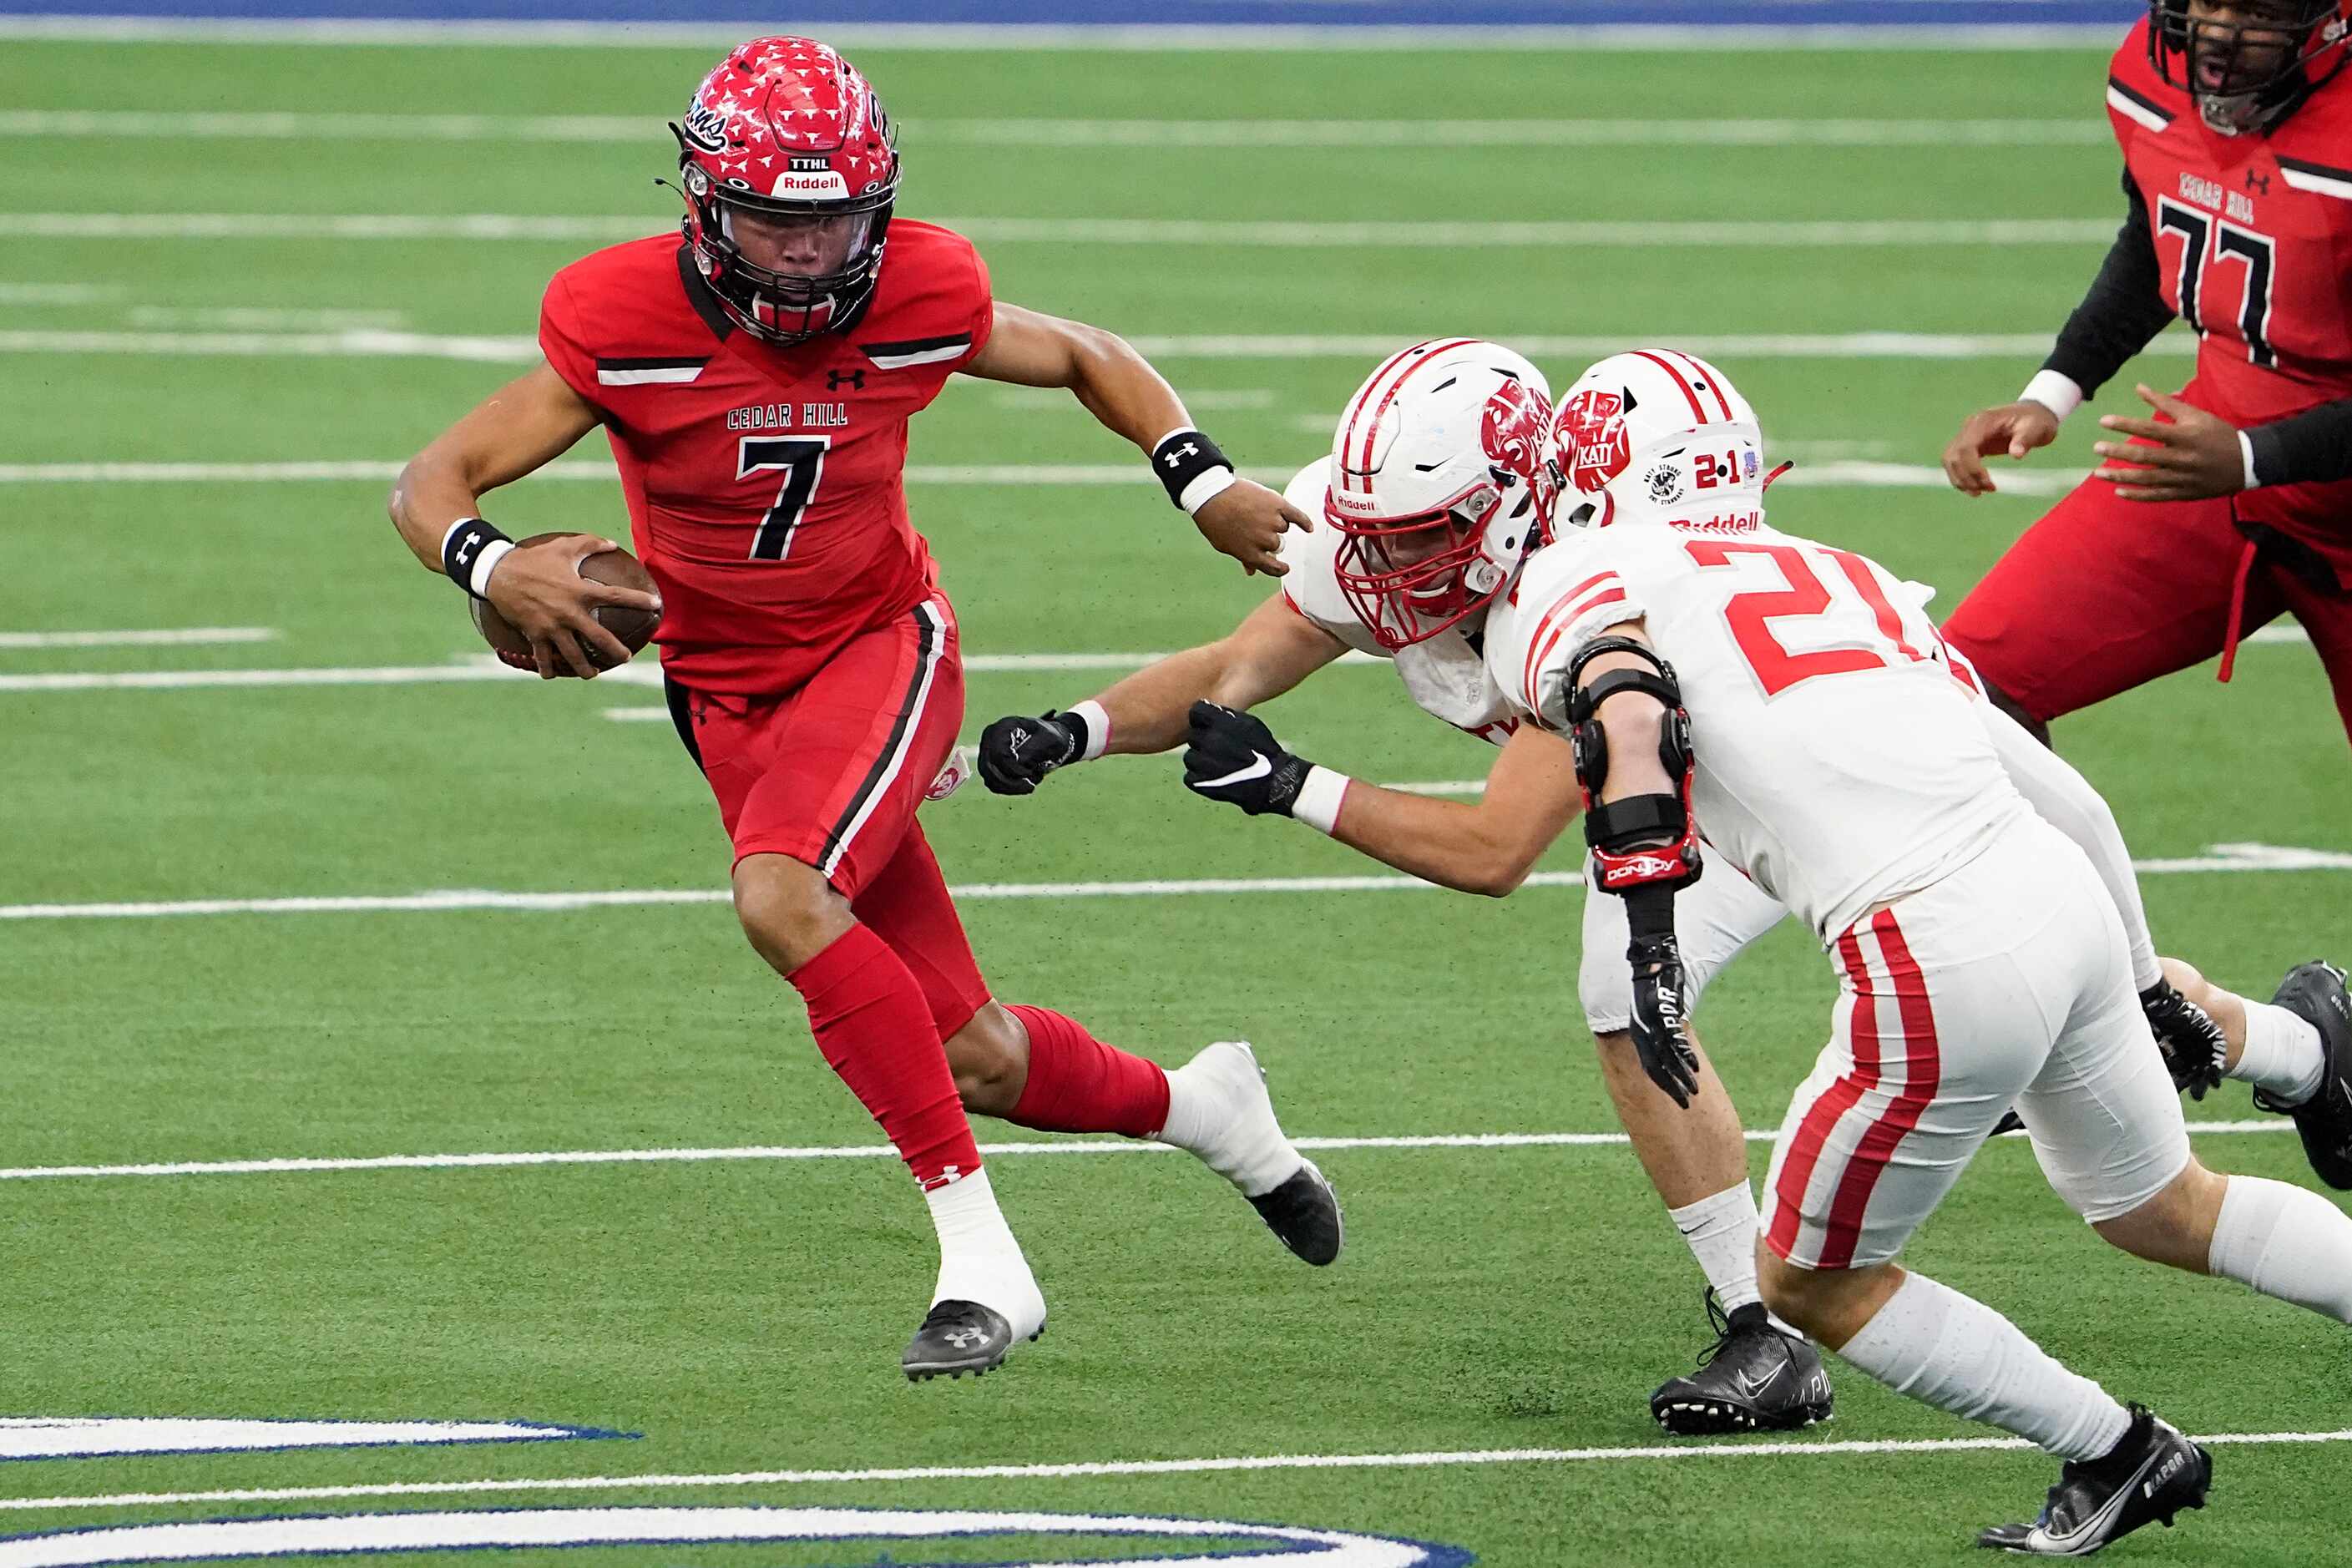 Cedar Hill quarterback Kaidon Salter (7) is chased down by Katy defensive lineman Cayde...